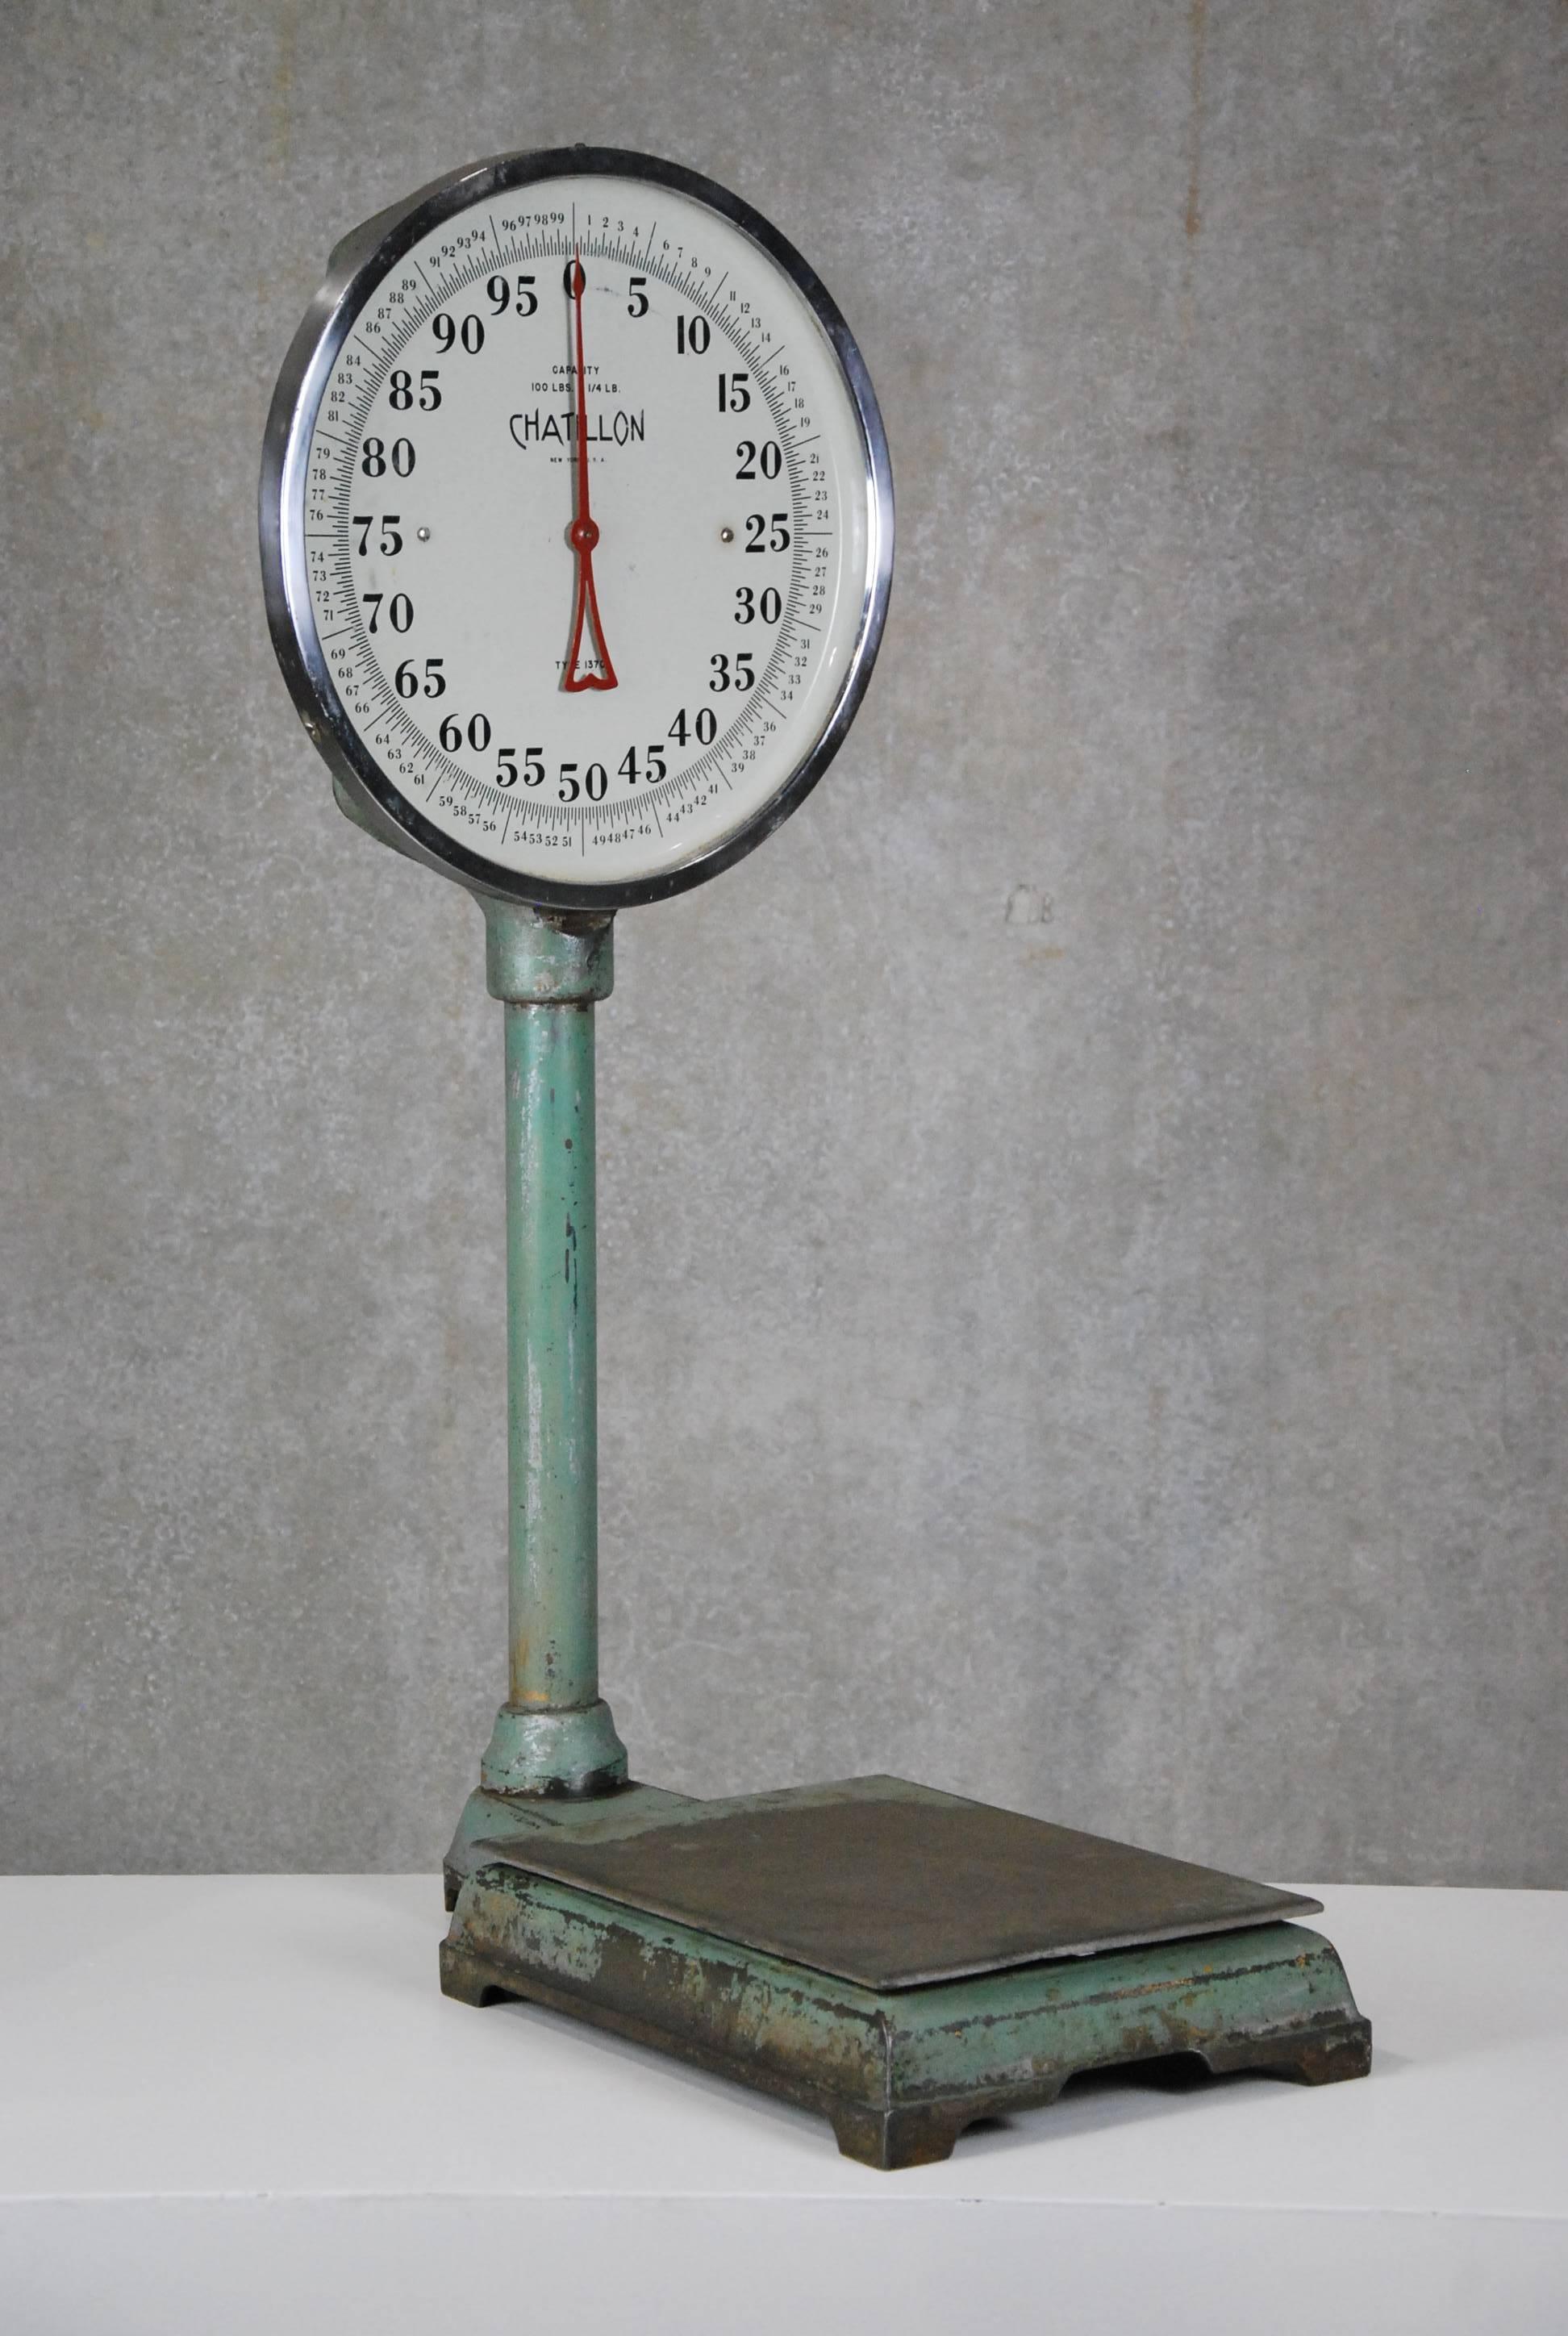 
Nice piece of Americana. This Chatillon industrial Lollipop scale retains it's original finish and is in working condition. John Chatillon & Sons precision scales was formed in 1835 in New York.